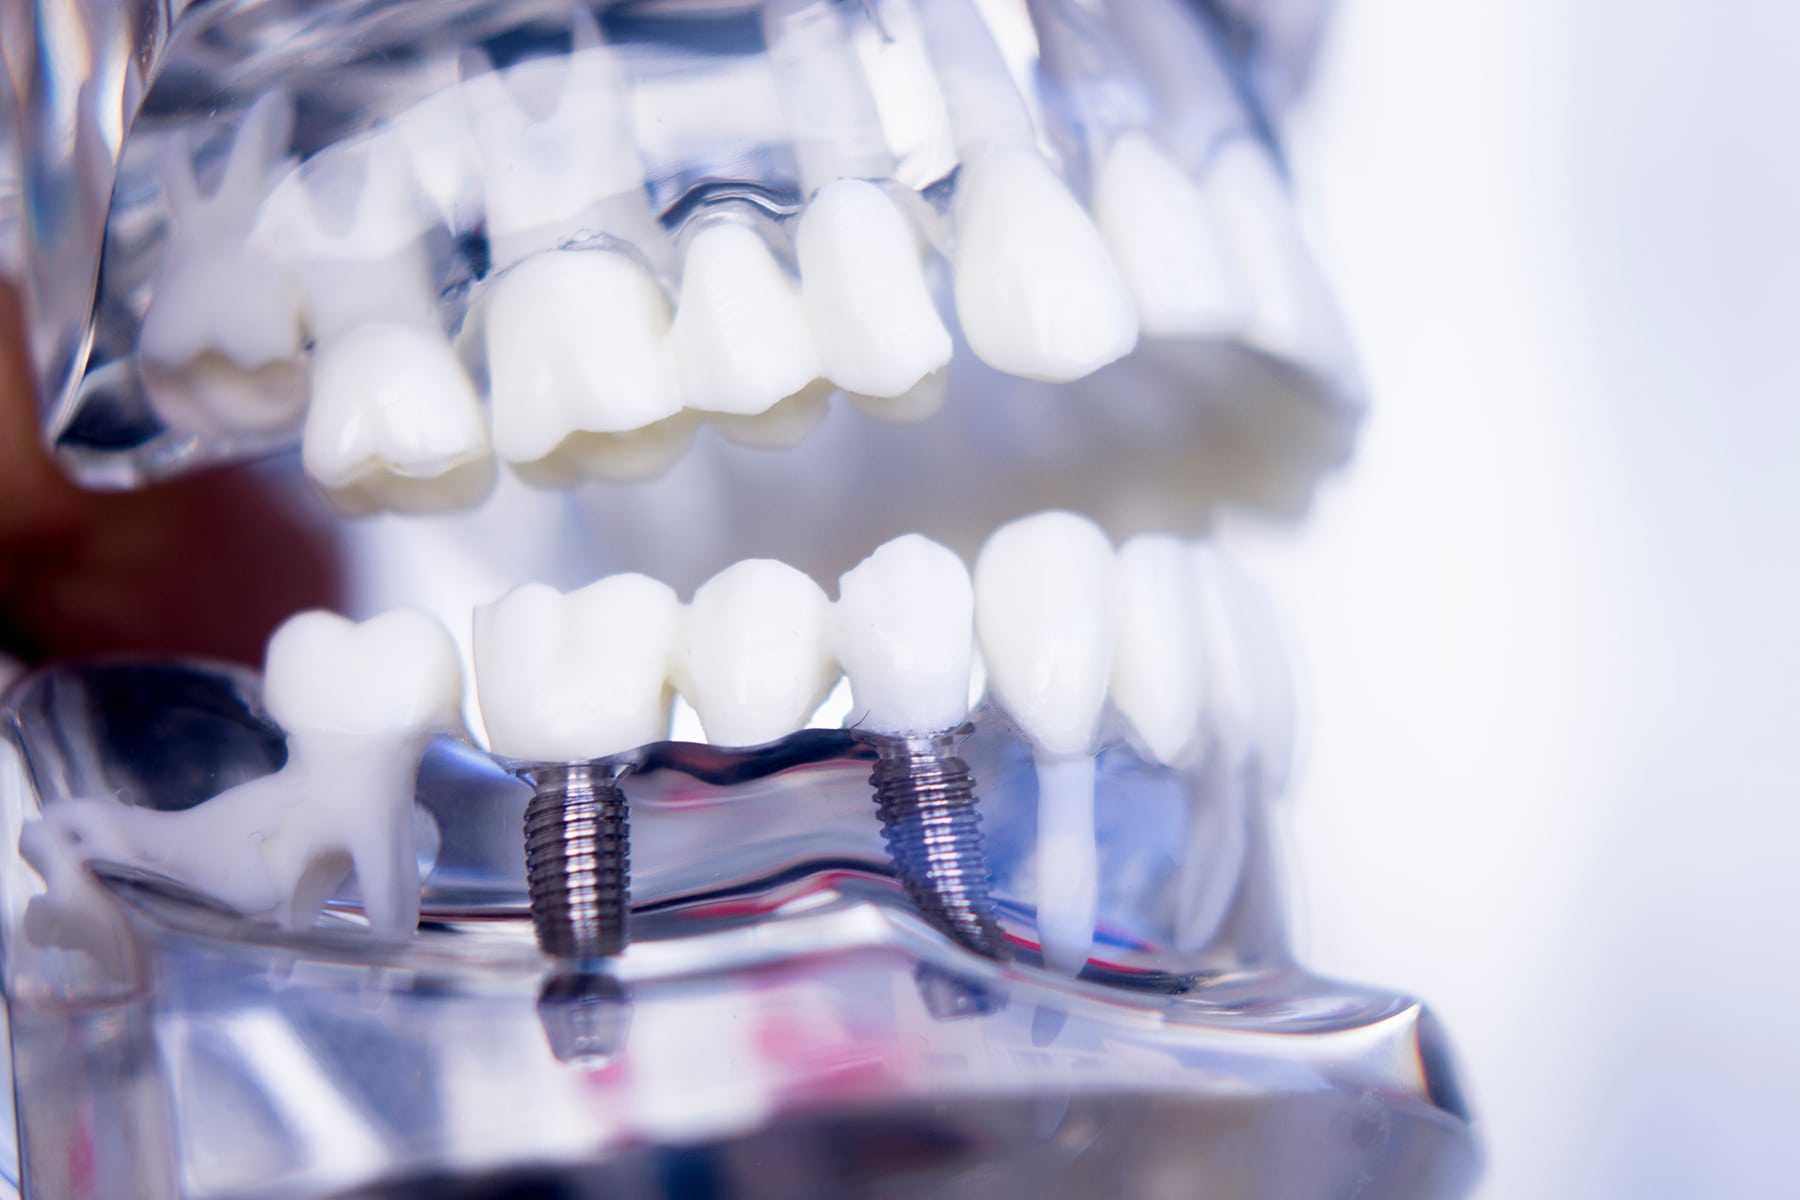 All-on-4 dental implants available in Brentwood, TN